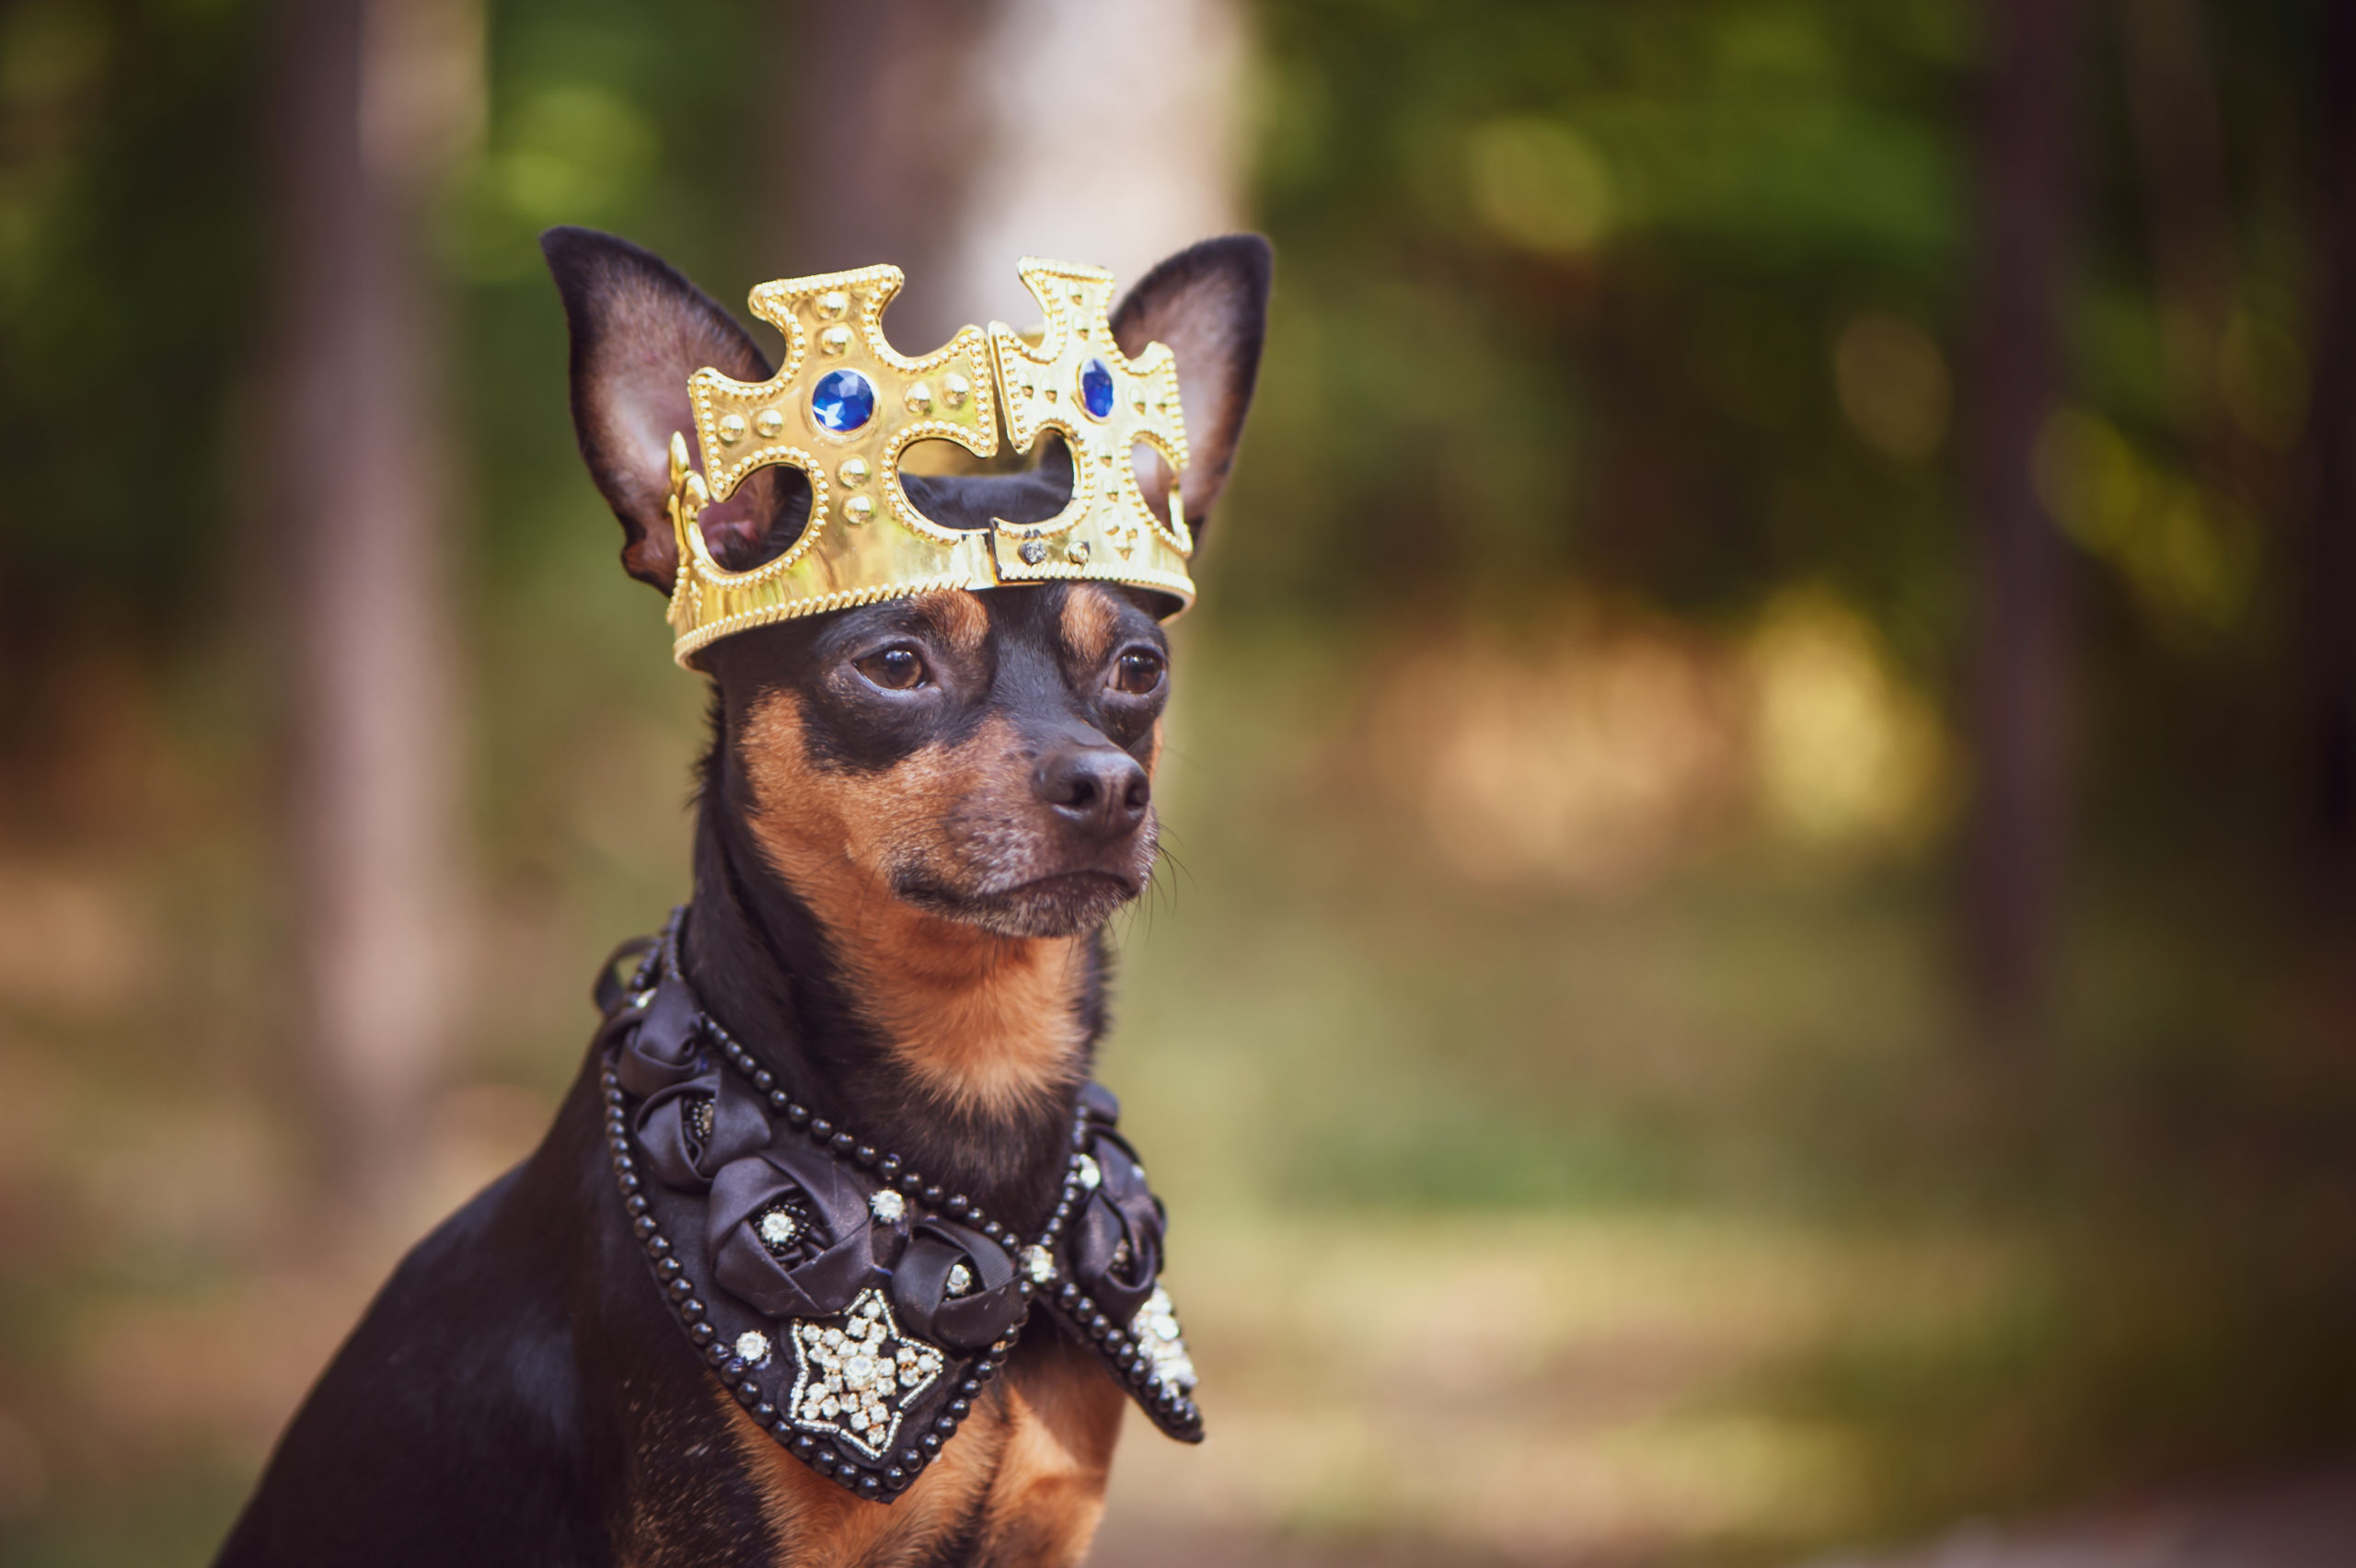 Dog in the crown, in royal clothes, on a natural background. Dog lord, prince, dog power theme